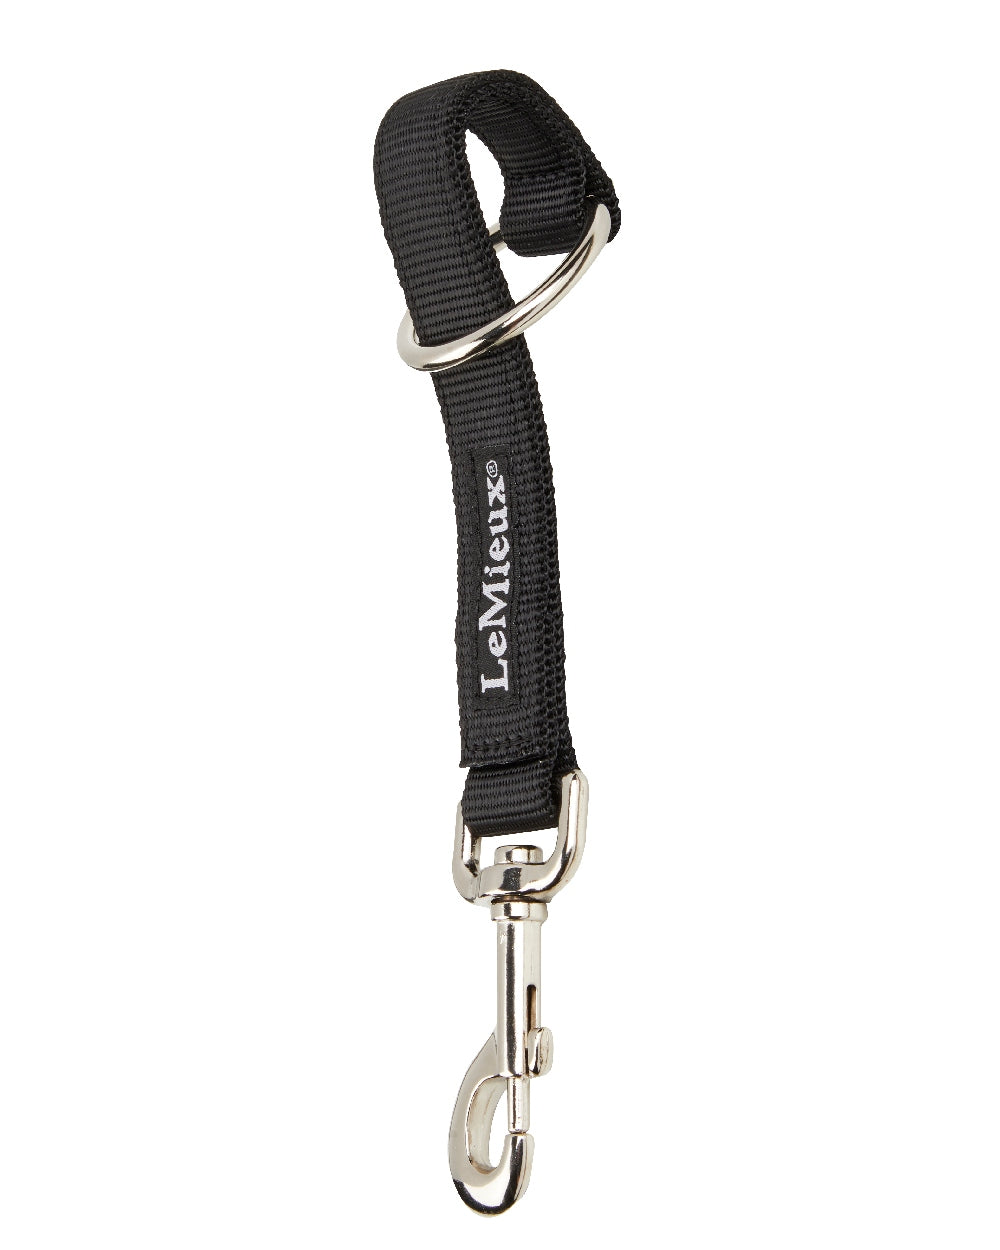 Black coloured LeMieux Hook and Loop Strap on white background 